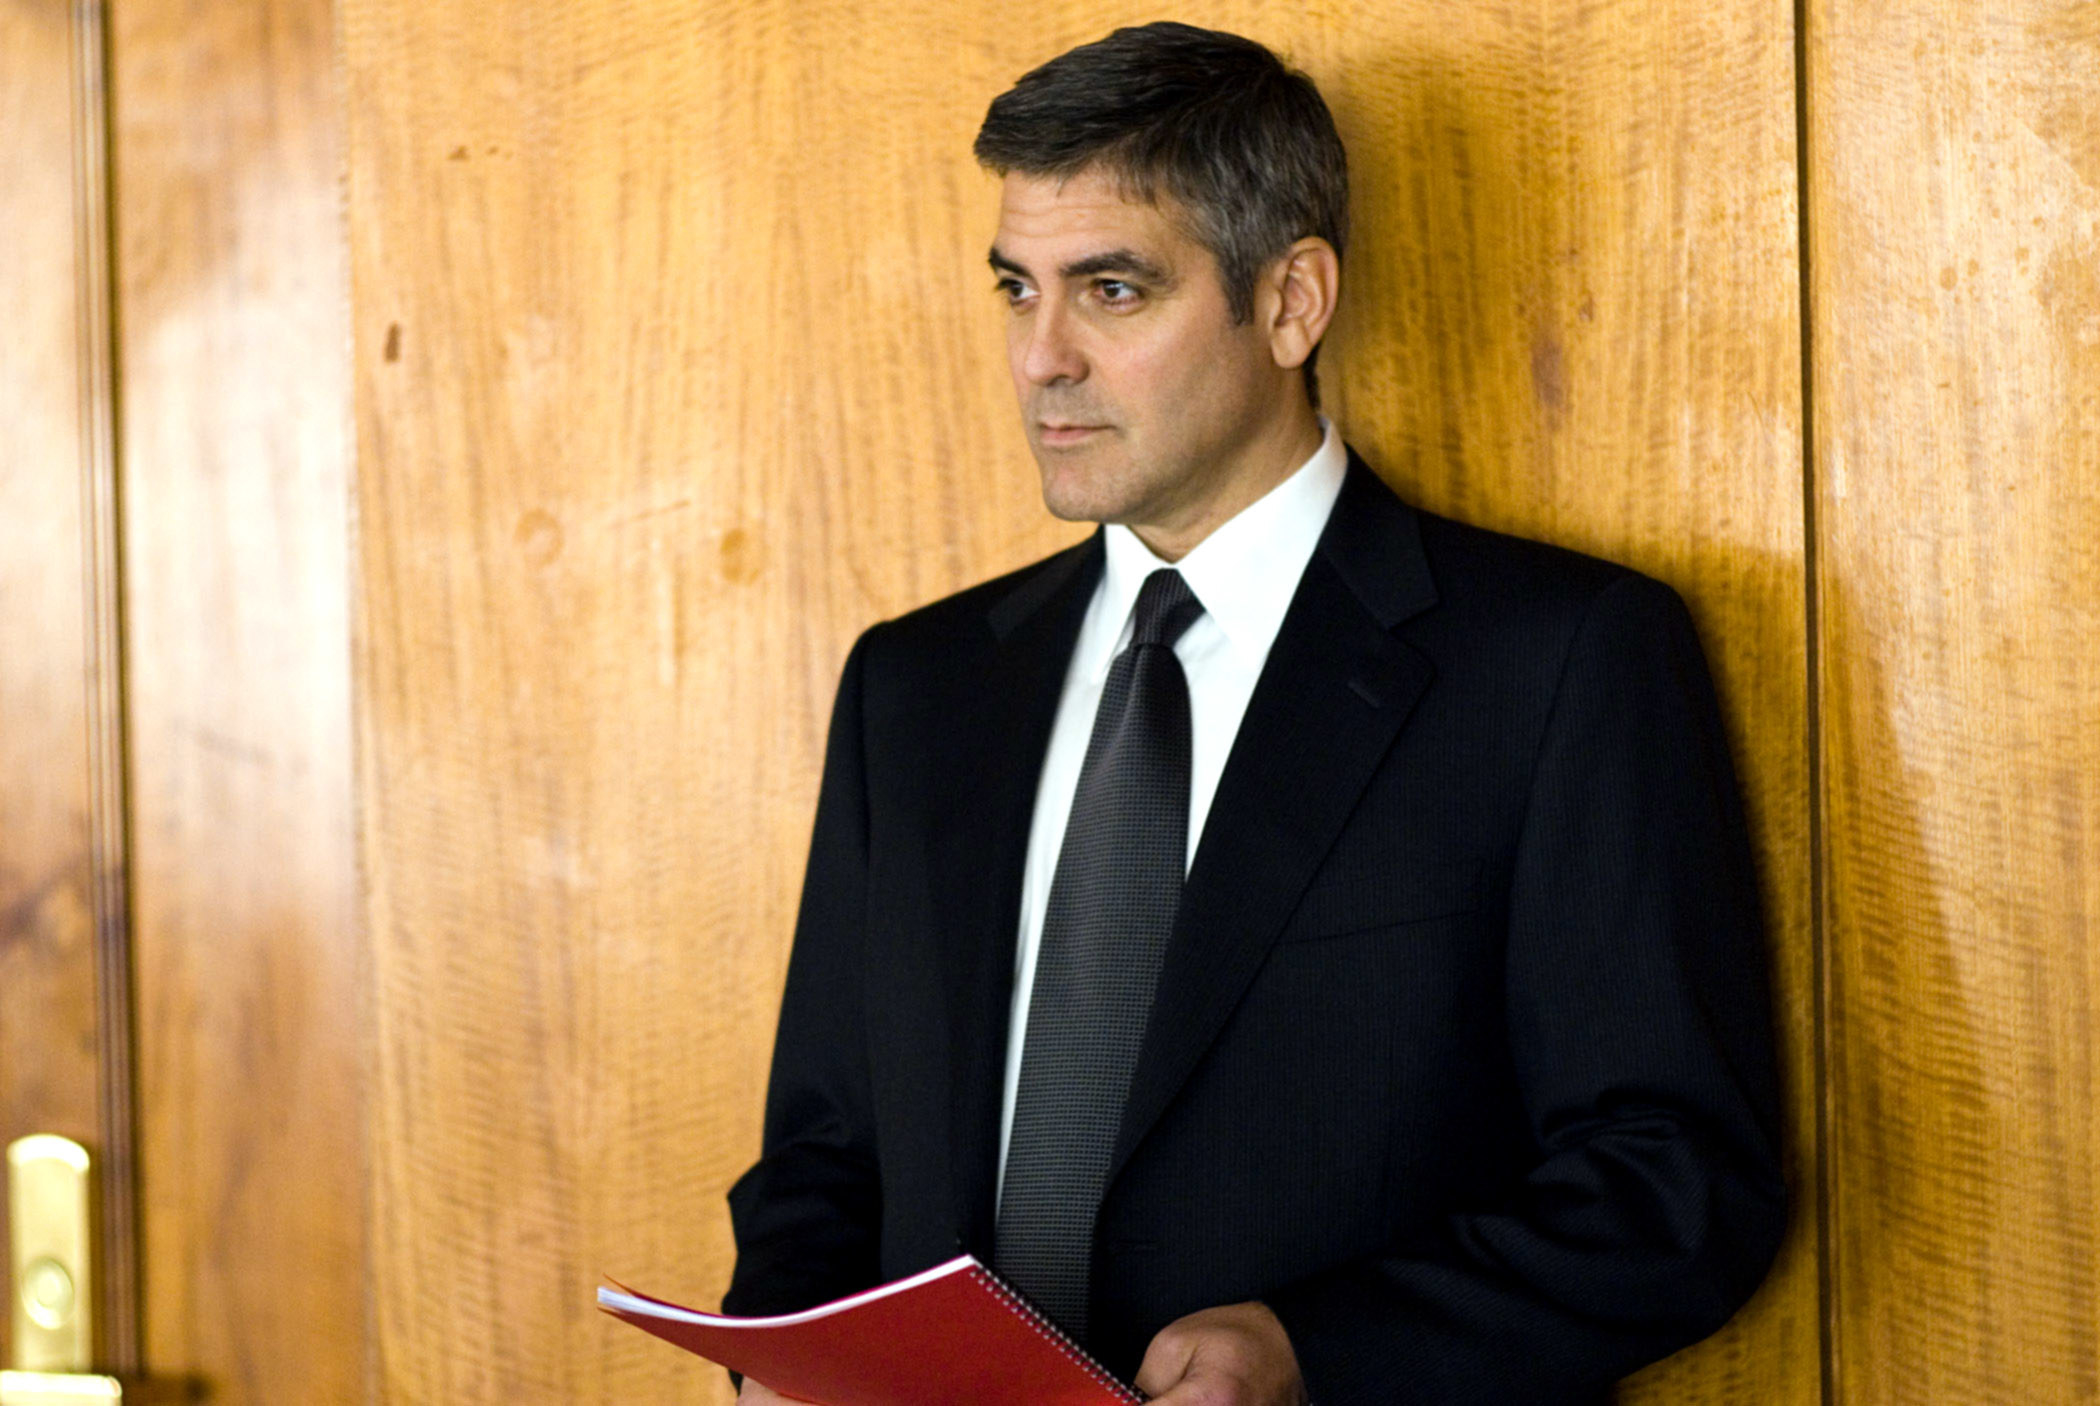 Clooney in the role of Michael Clayton